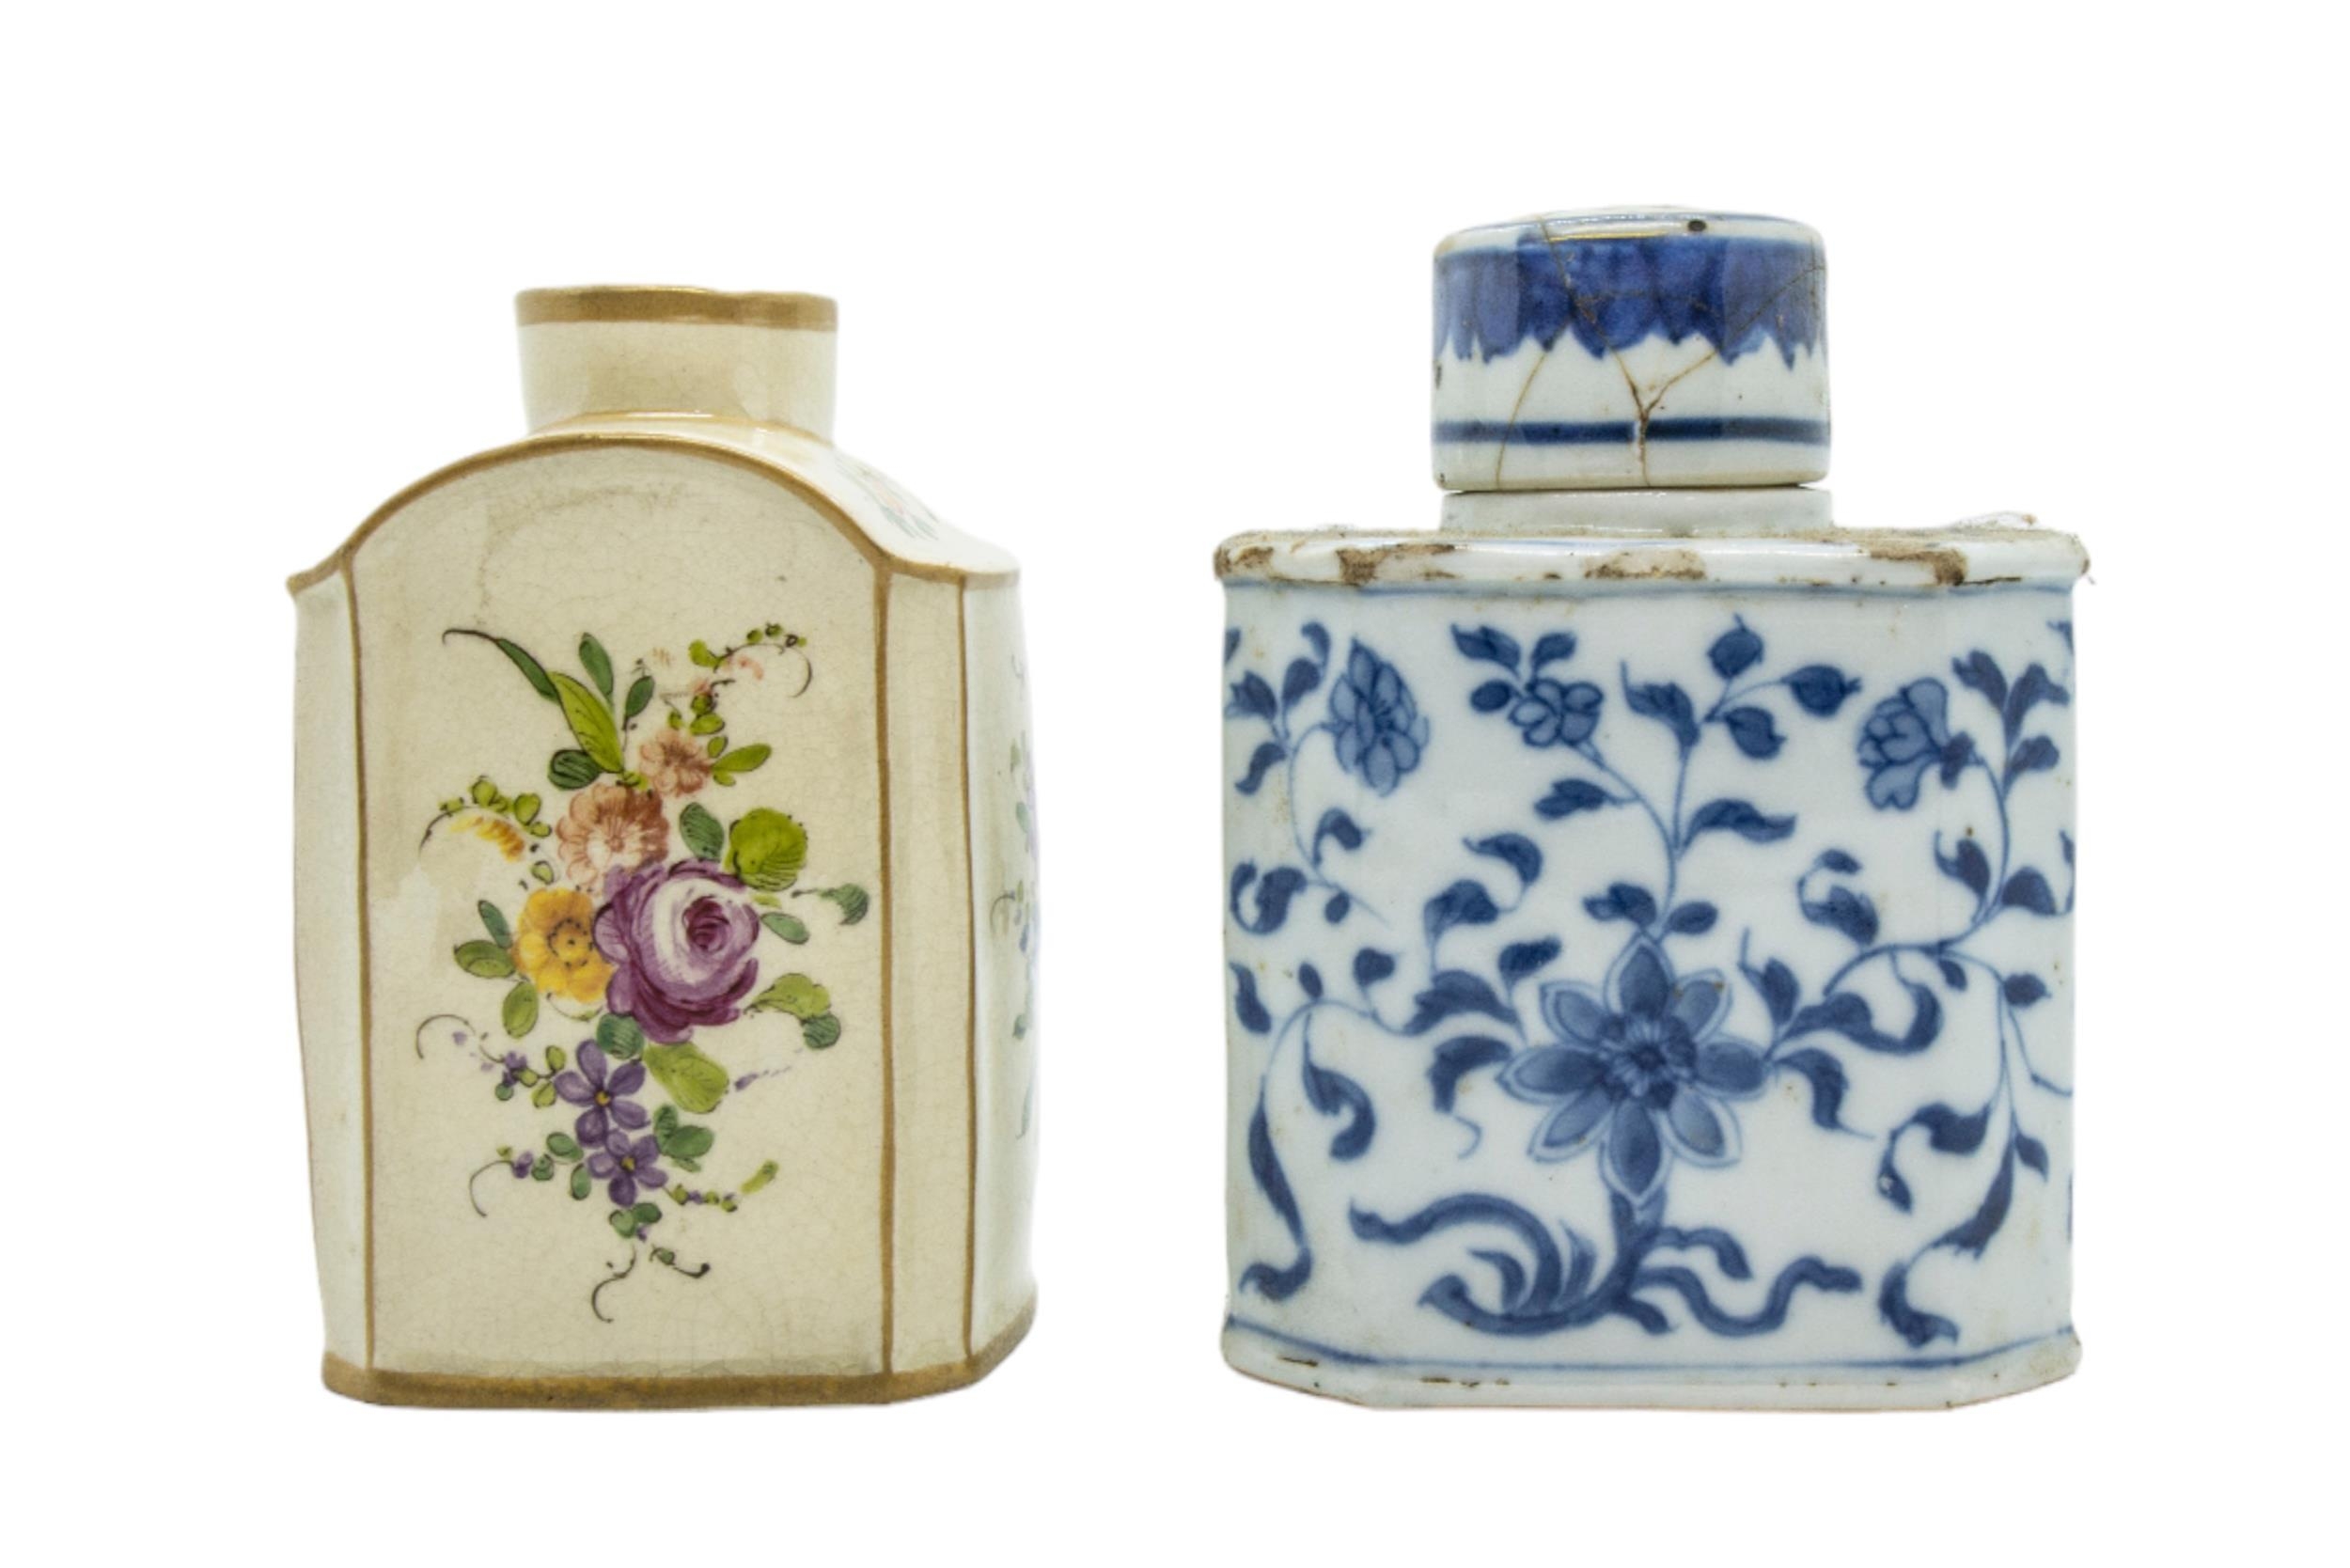 A MIXED GROUP OF EIGHT PORCELAIN TEA CADDIES, 18TH/19TH CENTURY, including two Imari pattern - Image 2 of 4